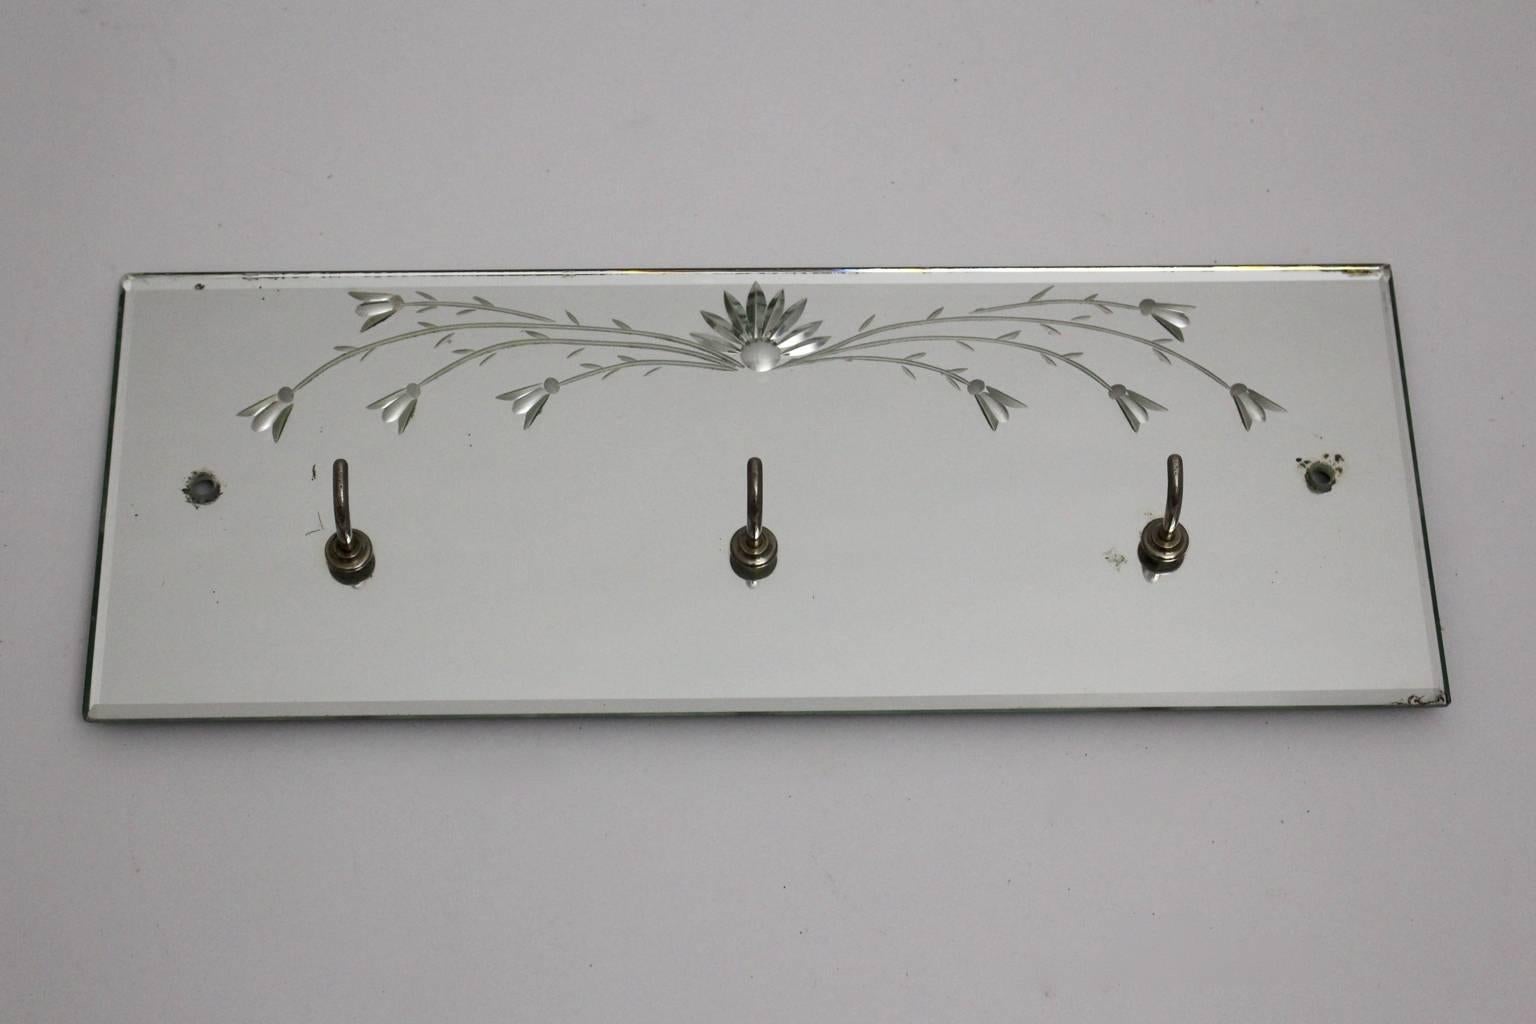 Mid century modern vintage coat rack from mirror glass with etched flowers. While the cute mirror board shows etched flower details, 1950s, Italy the metal hooks are chromed.
Good original condition with minor signs of age and use and with beautiful